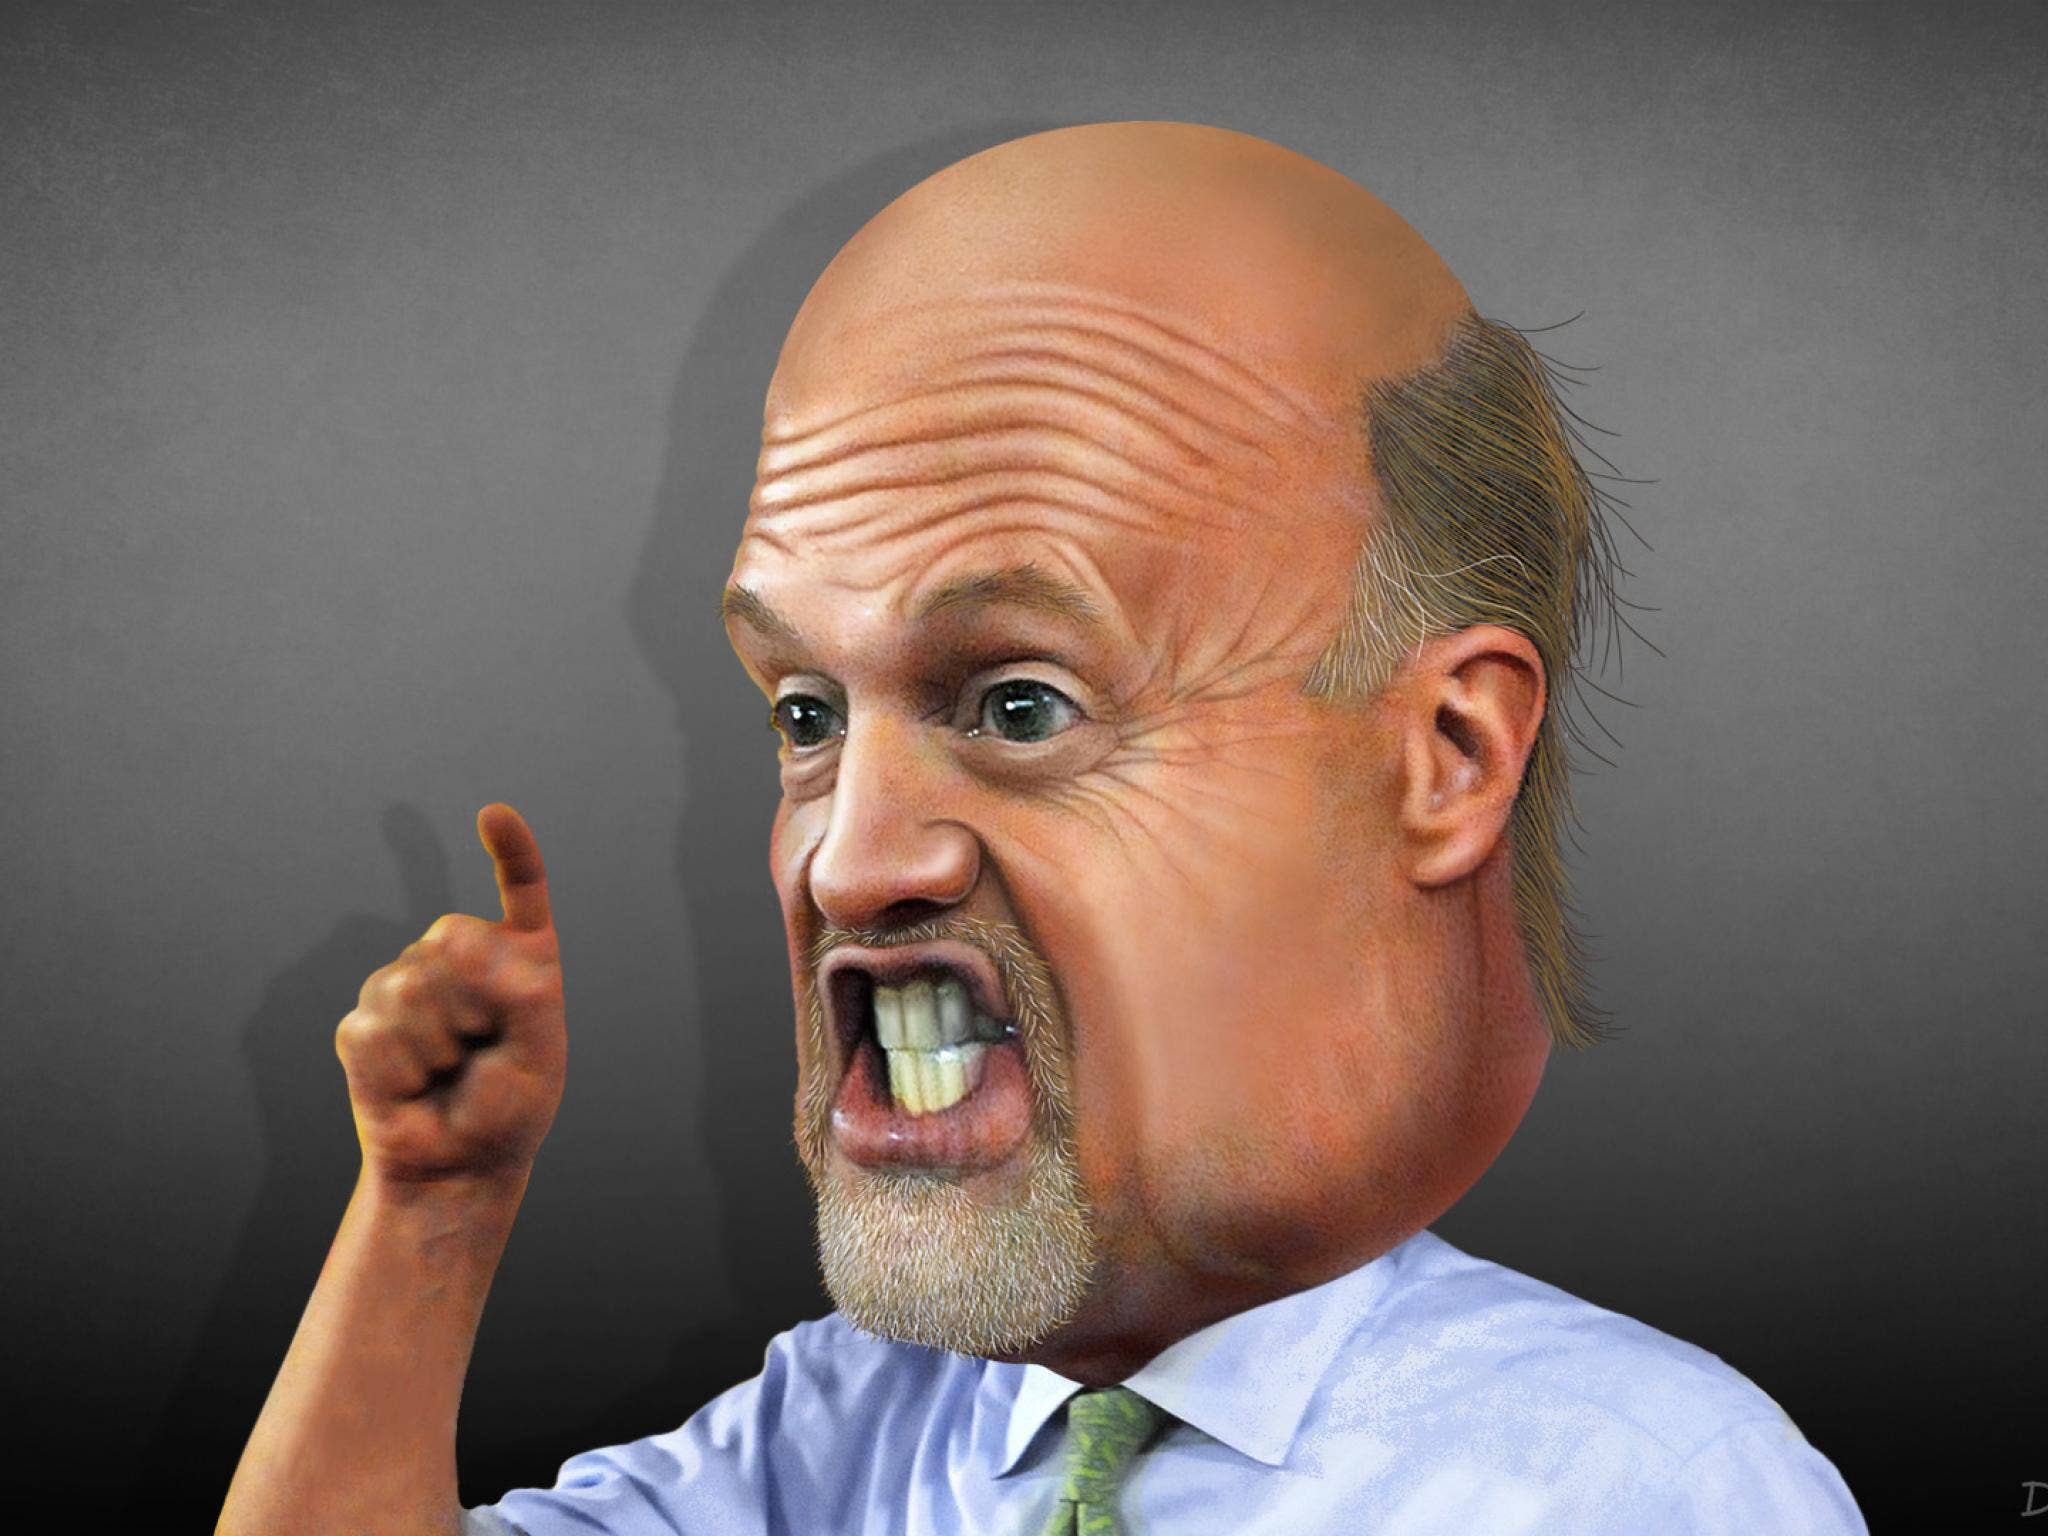 Jim Cramer Sides With The Apes, Says AMC Entertainment Stock Is A 'Terrible Short': 5 Other Short Squeeze Candidates On His Radar